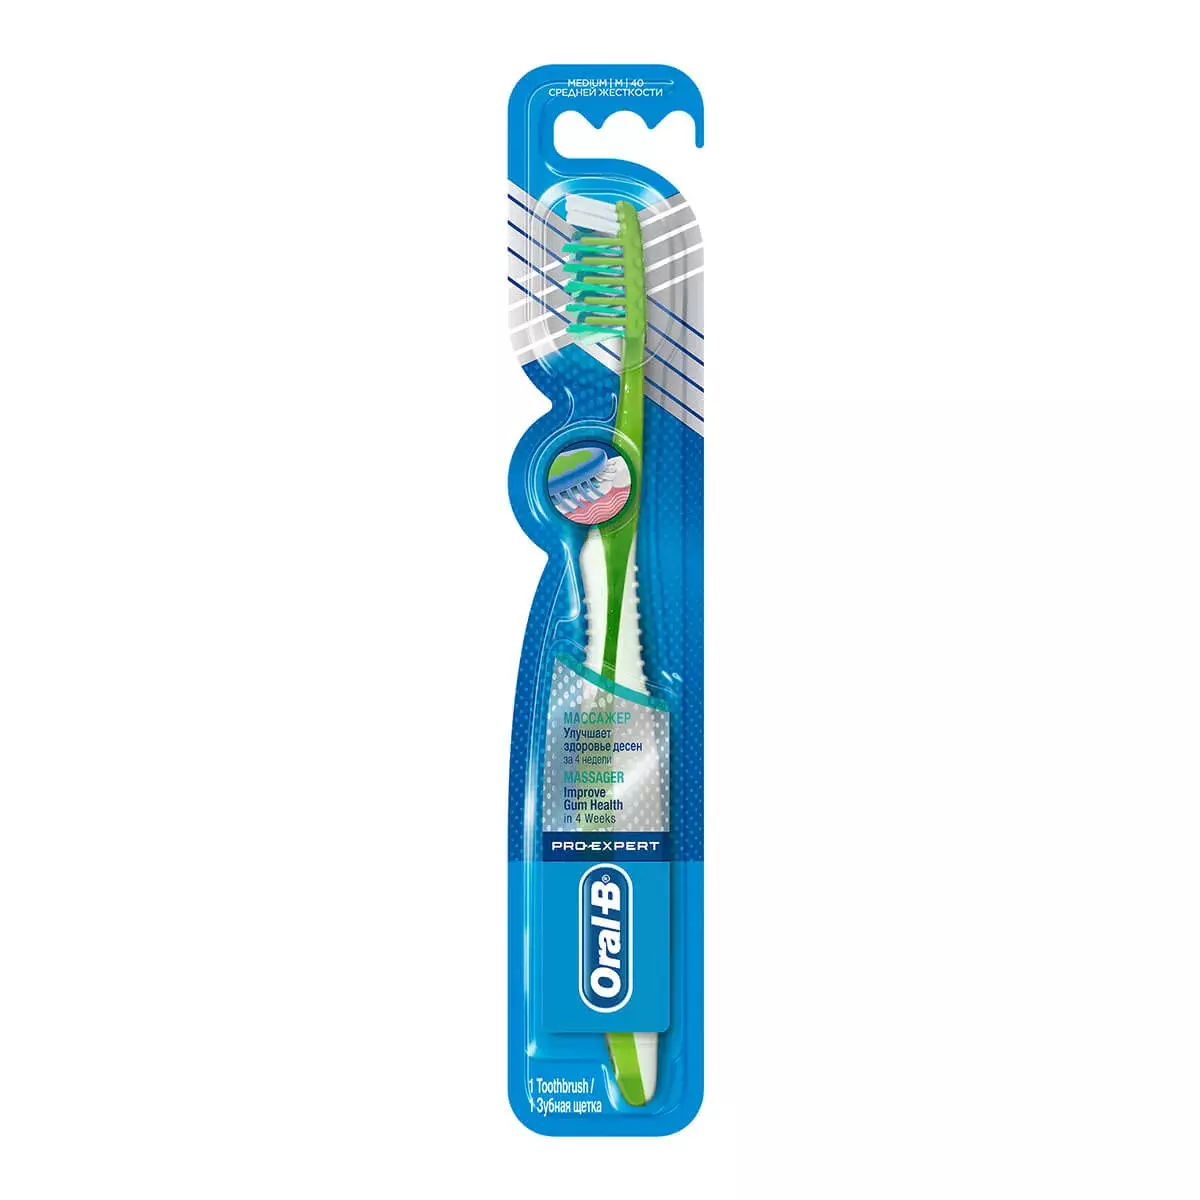 Toothbrushes Oral-B: Pro Expert, 3D White and other models, brushes for brackets and regular options, black and other brushes. Rating and how to choose? 24020_19